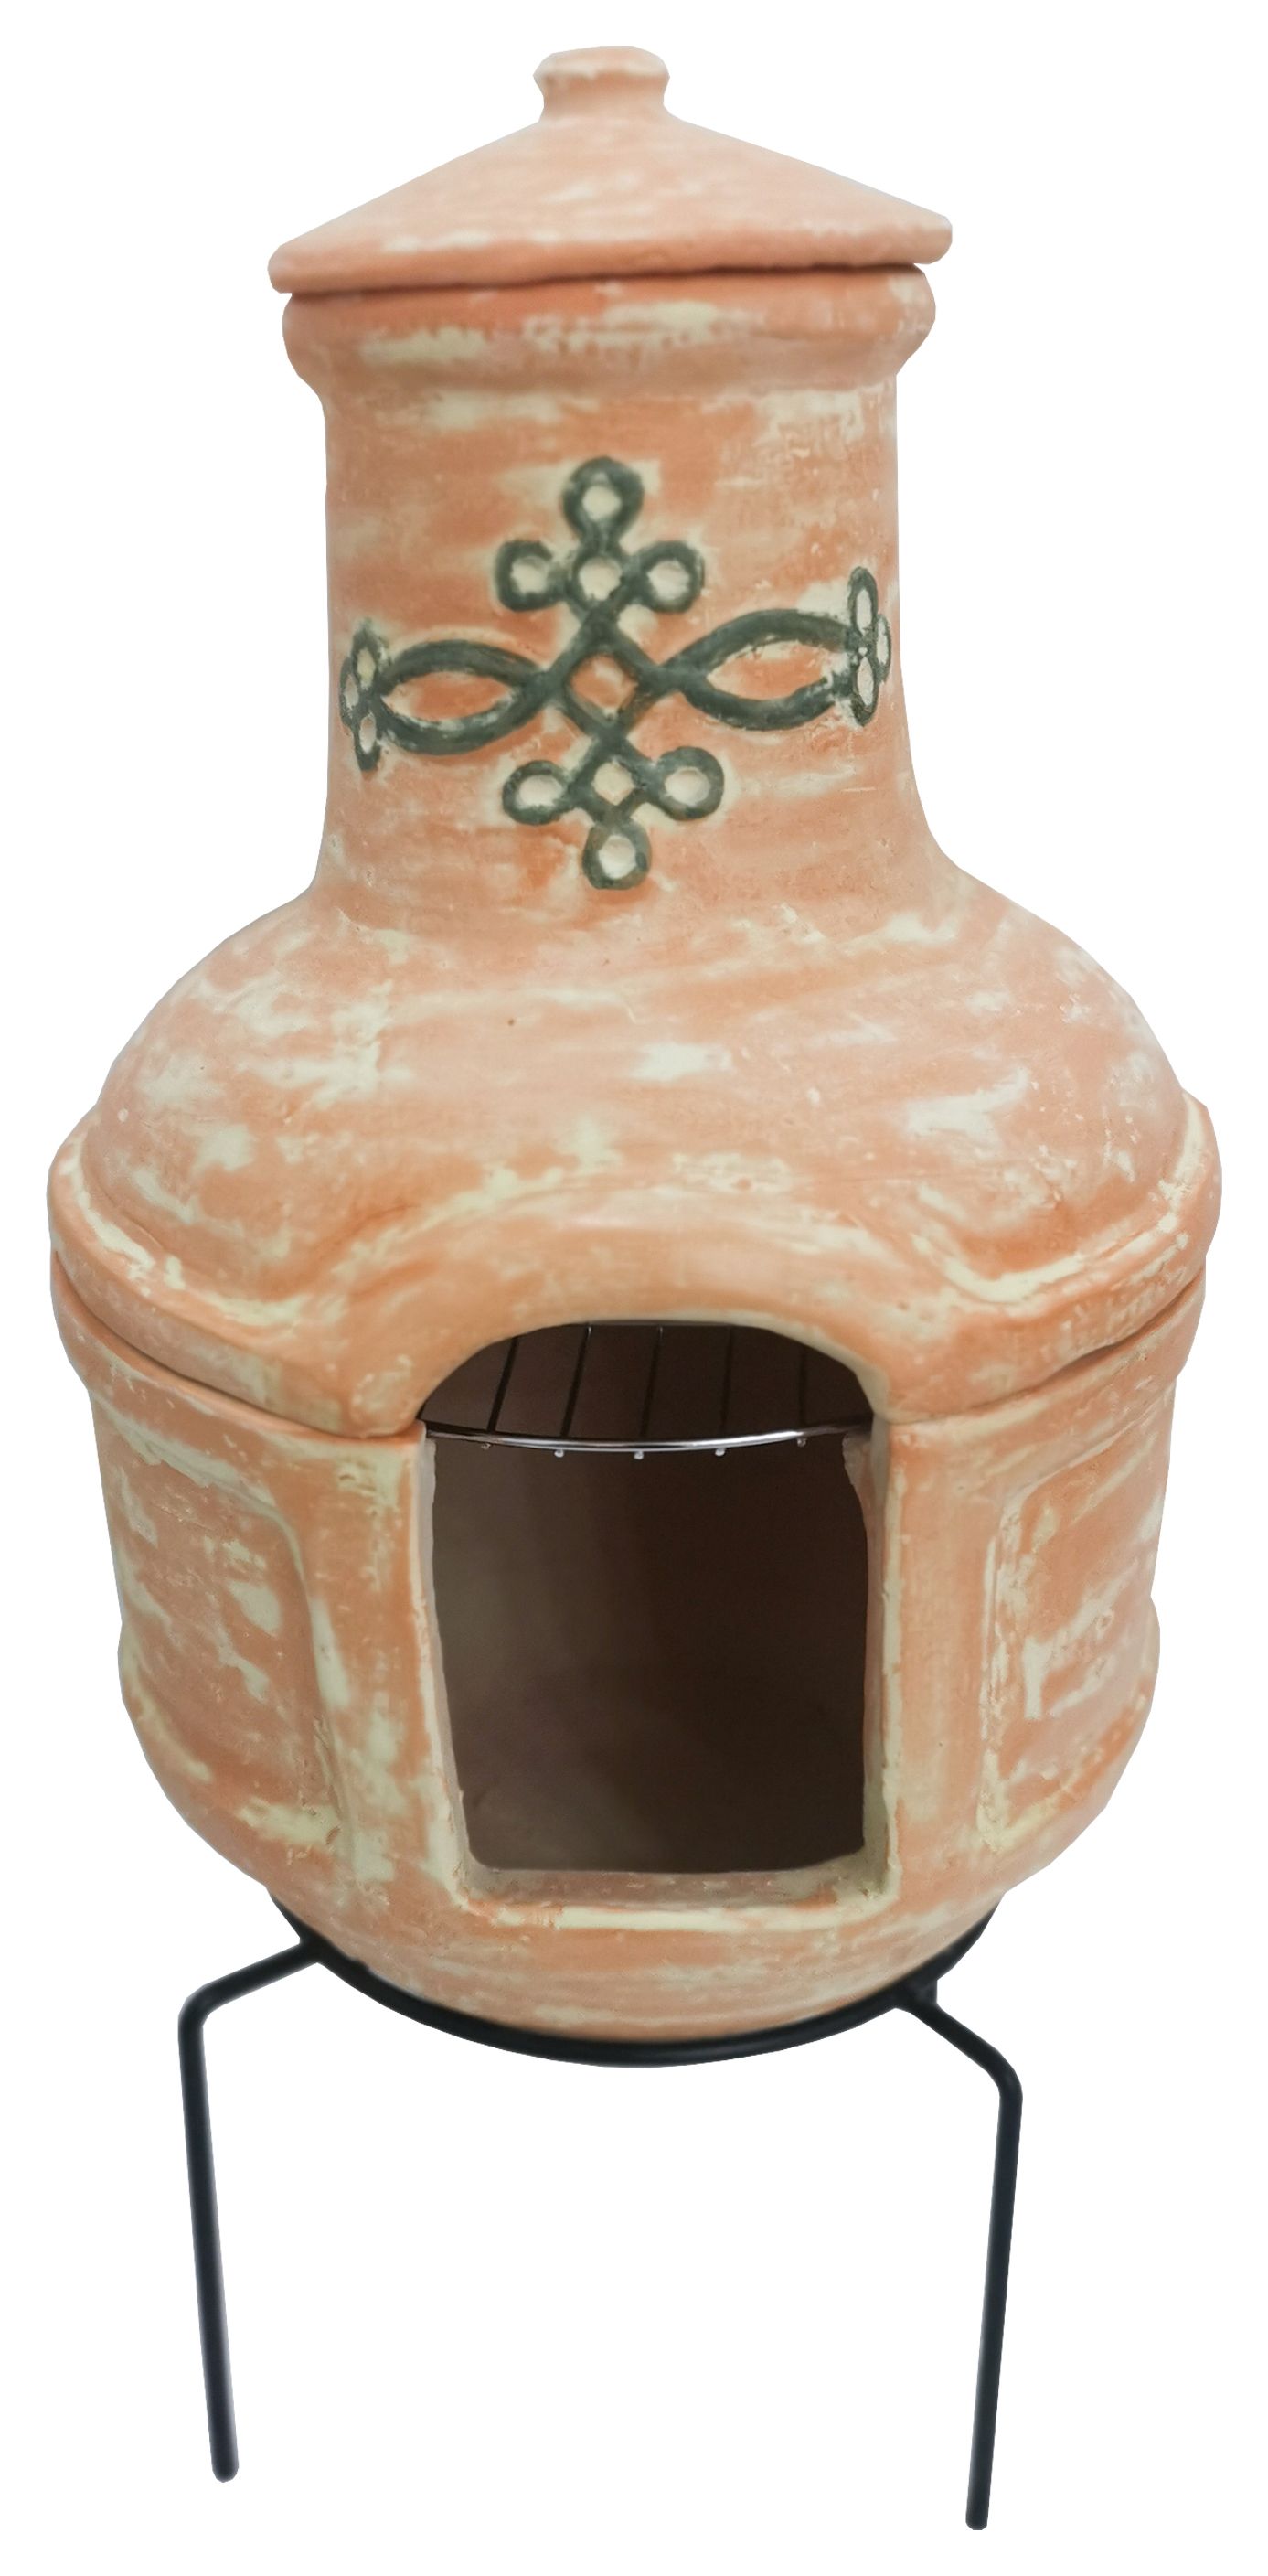 Image of Charles Bentley Terracotta Clay Outdoor Chimenea with Bbq Grill - Small